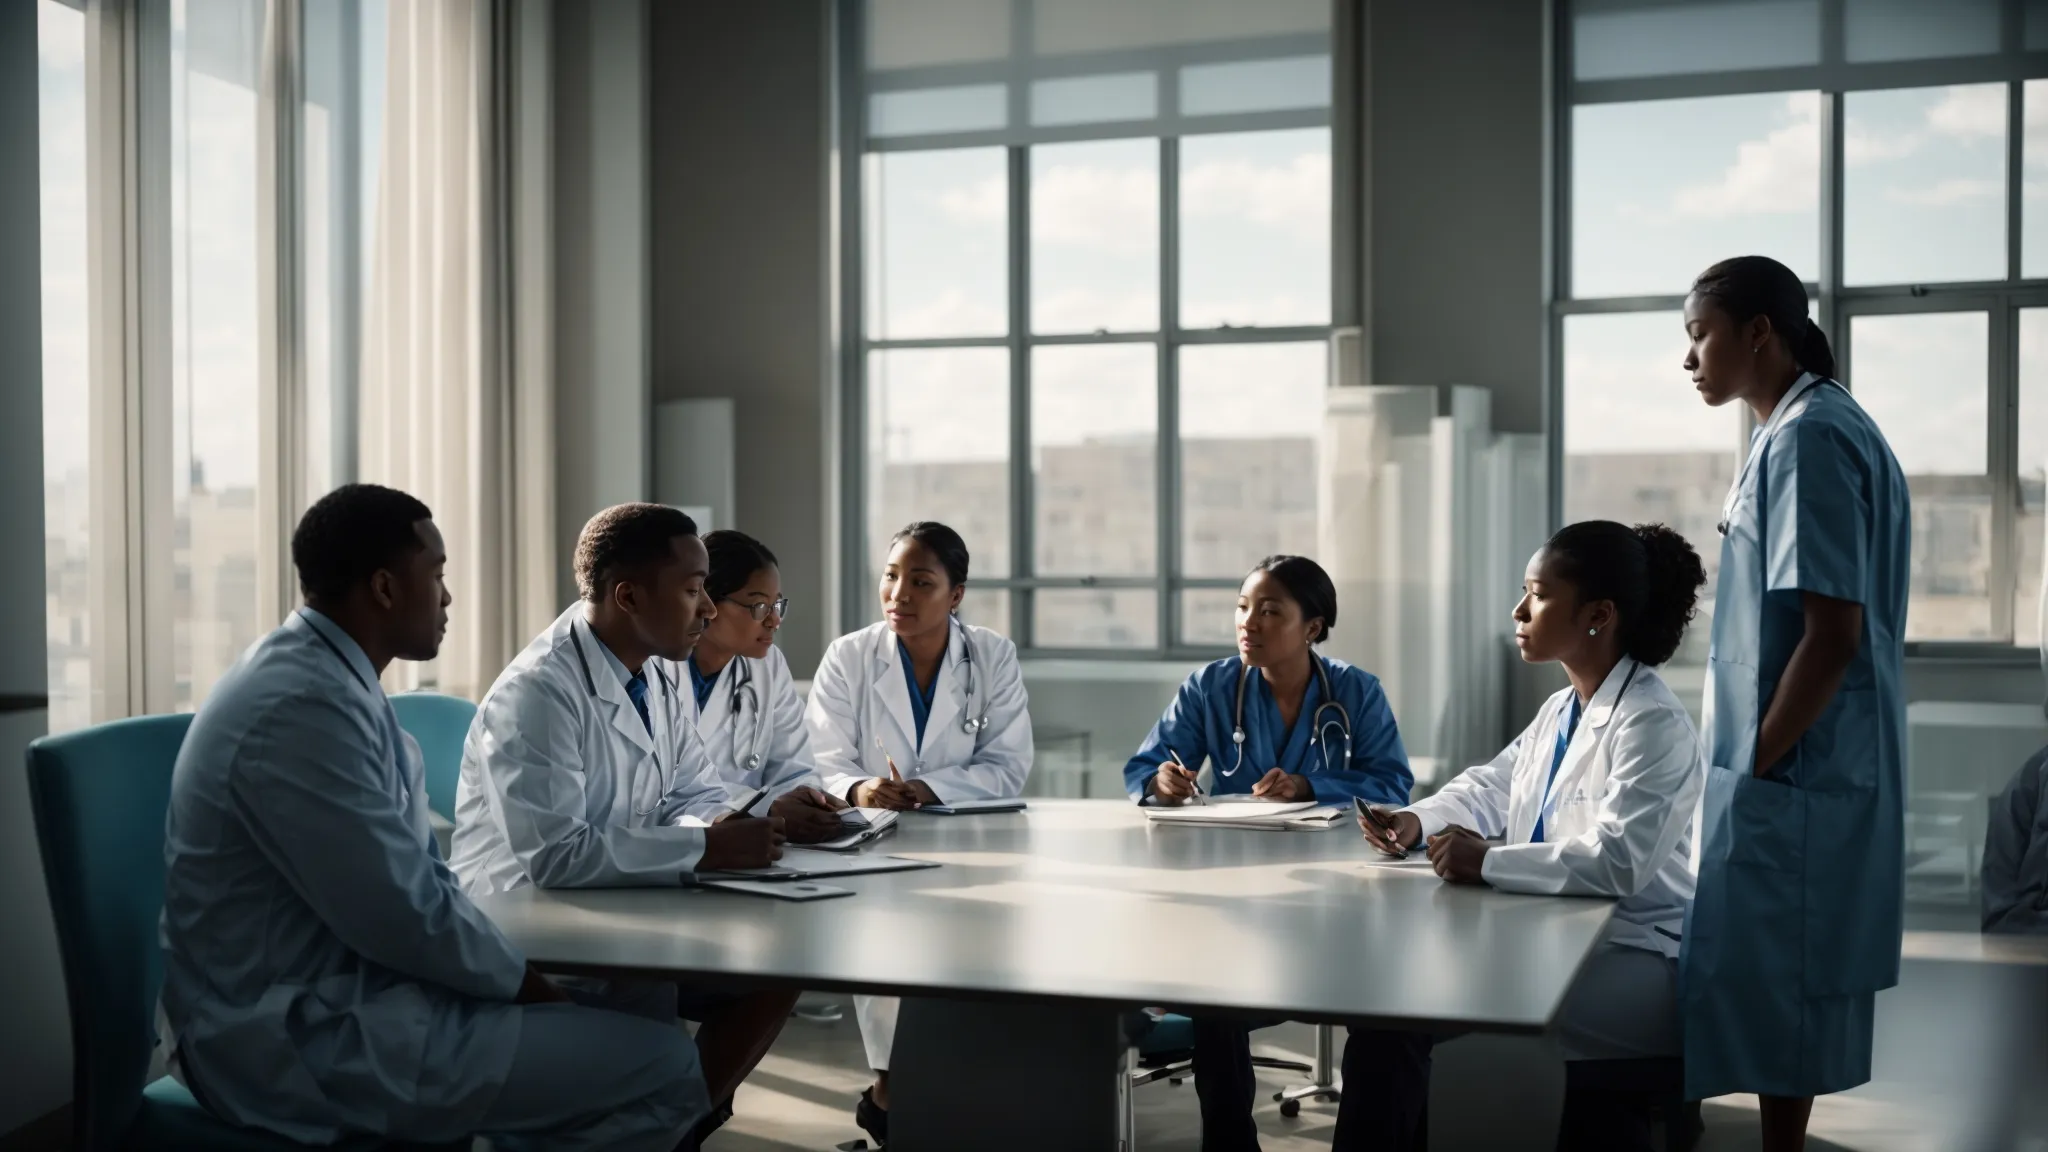 a group of medical professionals gathers around a table to discuss plans, with a clear blue sky seen through the window, symbolizing hope and forward-thinking in healthcare.